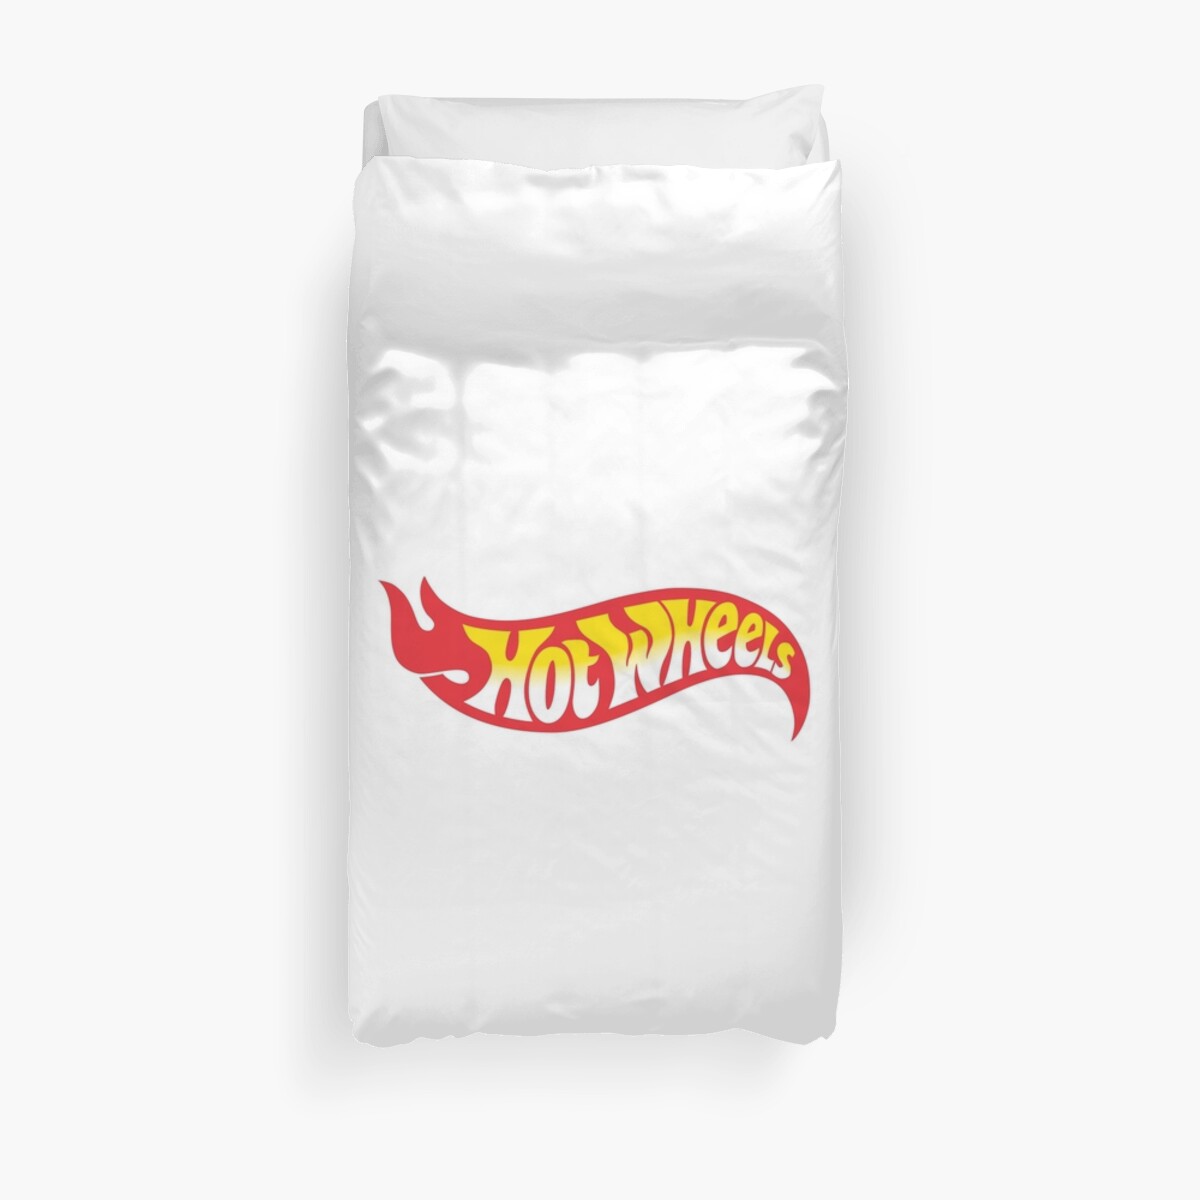 Hot Wheels Duvet Cover By Karlries Redbubble